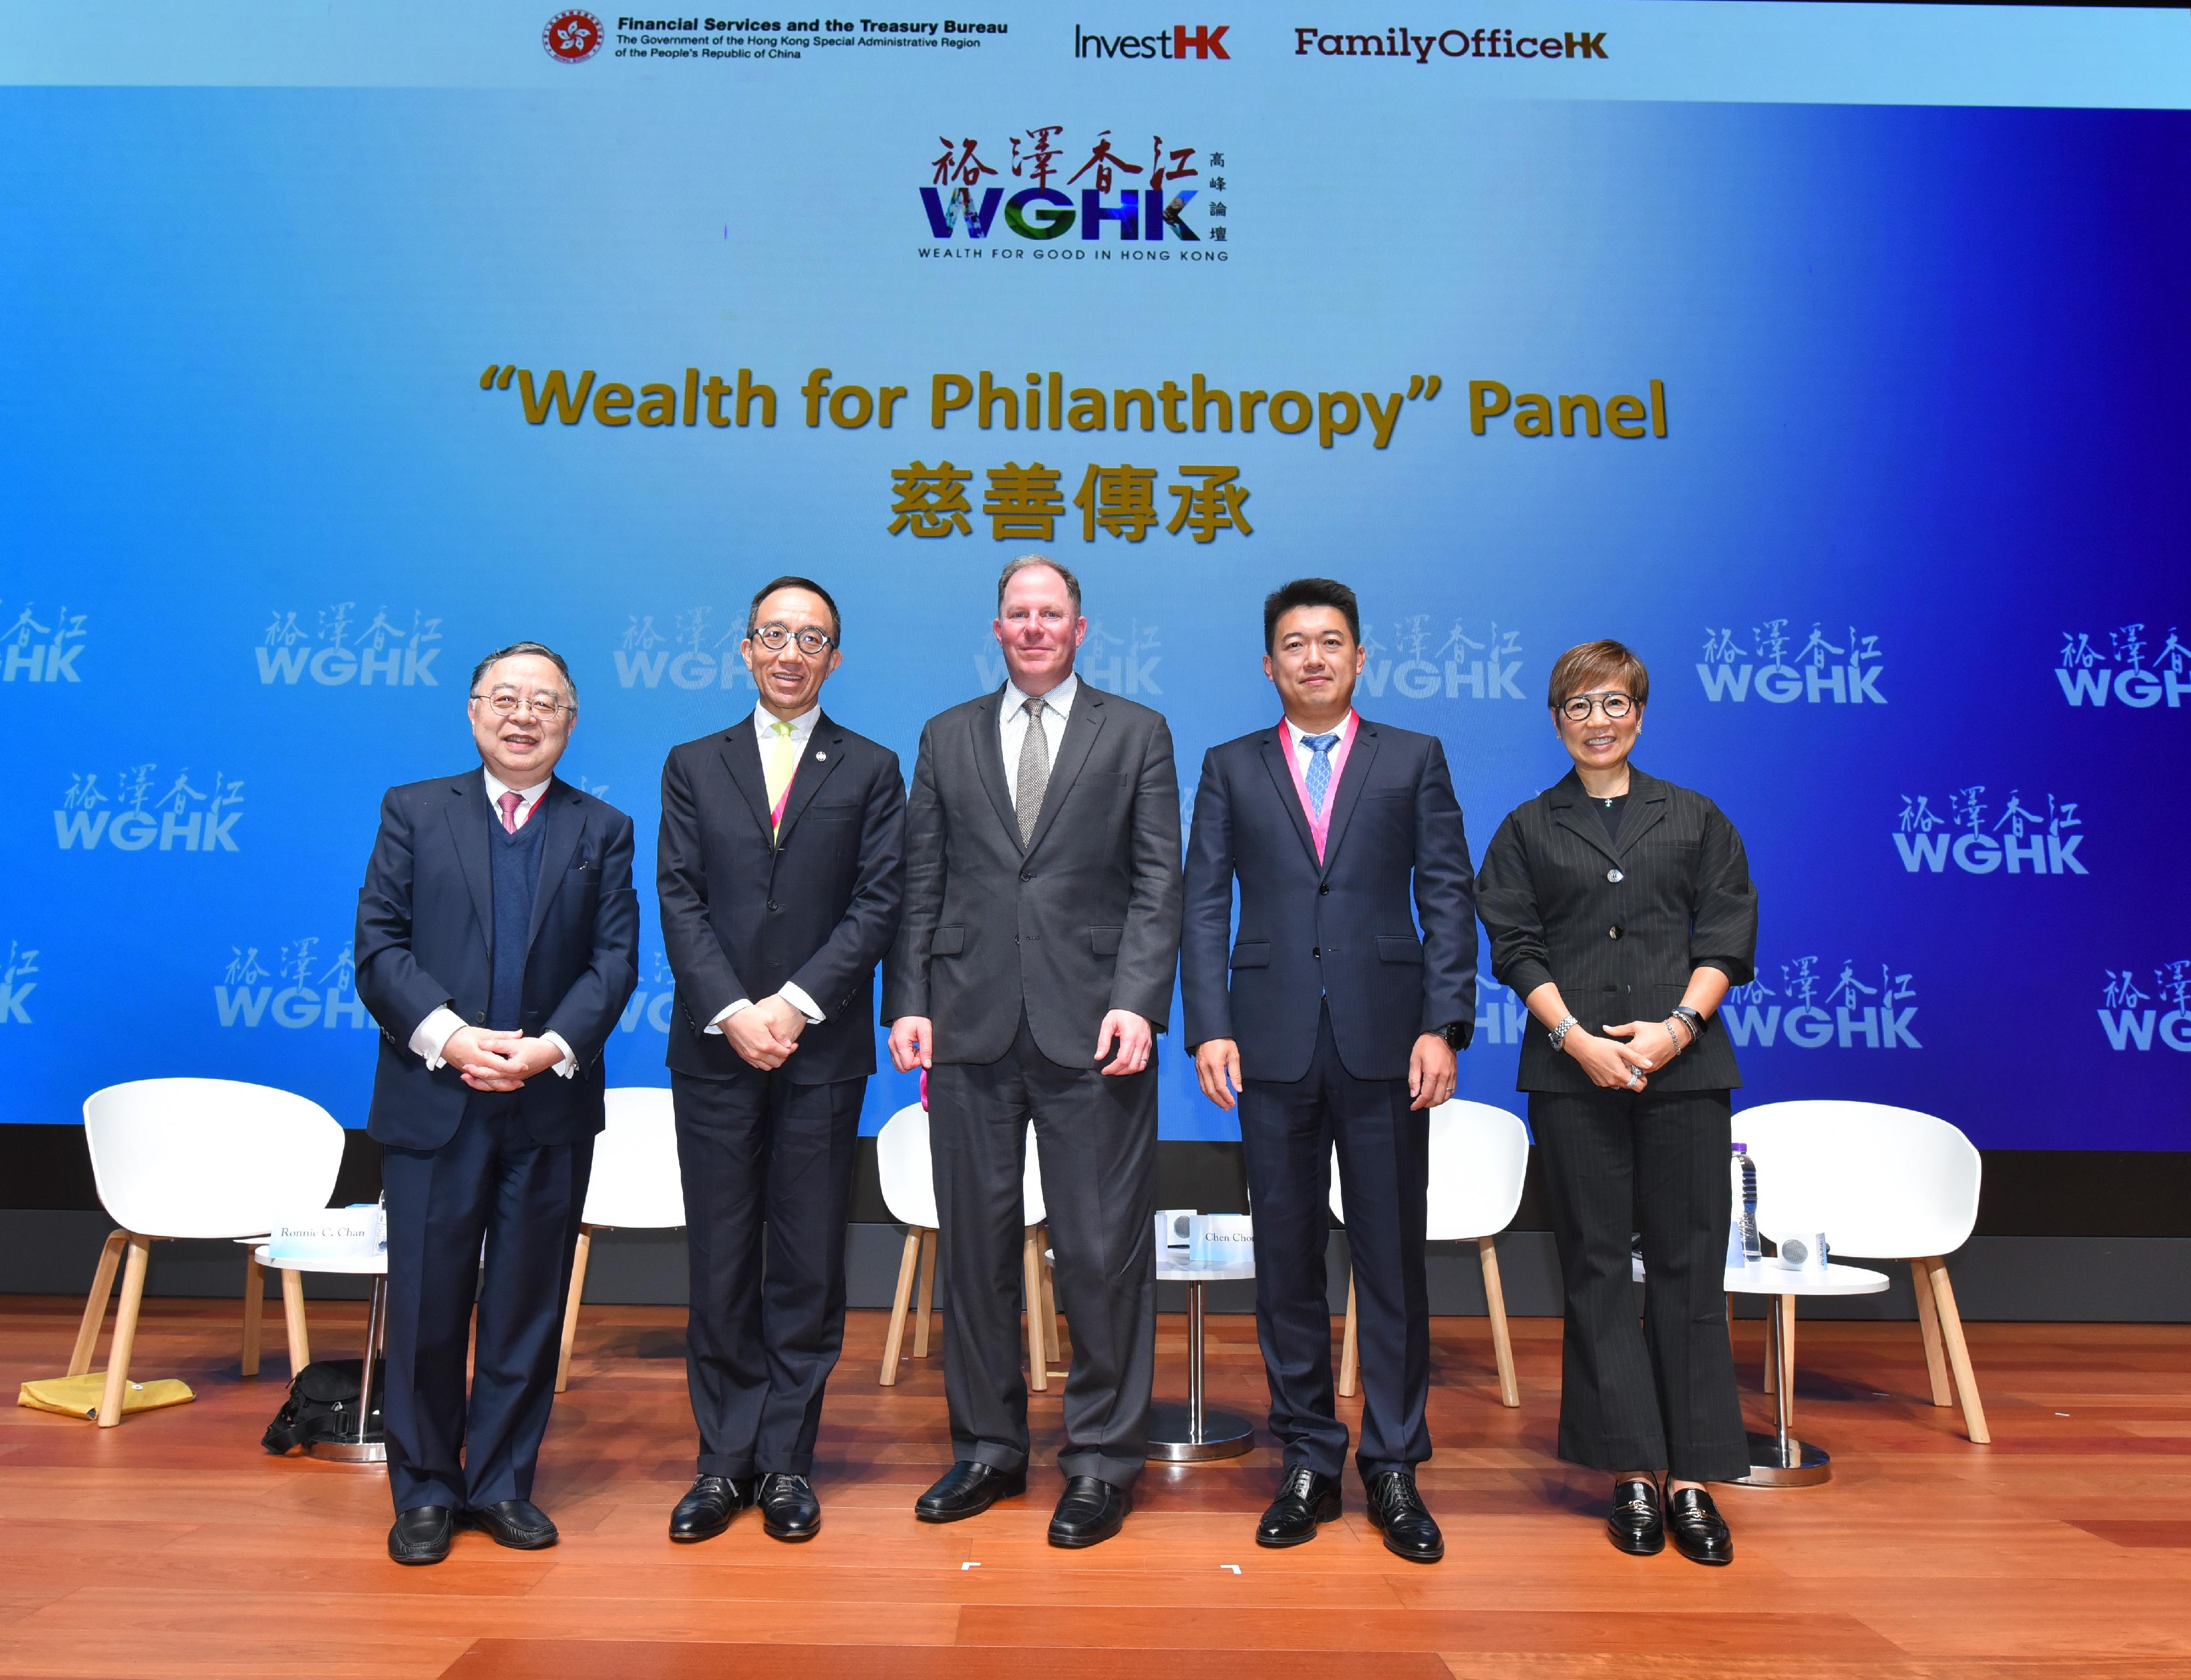 The final panel discussion of the Wealth for Good in Hong Kong Summit today (March 24) was the "Wealth for Philanthropy" panel moderated by the Chair of Hang Lung Properties Limited, Mr Ronnie Chan. The speakers discussed philanthropic opportunities for global family offices in Hong Kong and how family offices face greater expectations to adopt philanthropic practices to better serve society and communities in need. Panel speakers (from left to right): Mr Chan; the Executive Director of Charities and Community of Hong Kong Jockey Club, Mr Gabriel Leung; the Director of Philanthropic Partnerships of Bill & Melinda Gates Foundation, Mr Robert Rosen; the President and Party Secretary of the CPC Committee of Guoqiang Foundation and Non-executive Director of Country Garden Holdings Company Limited, Mr Chen Chong; and the CEO of Novel Investment Partners Limited, Ms Ronna Chao.
